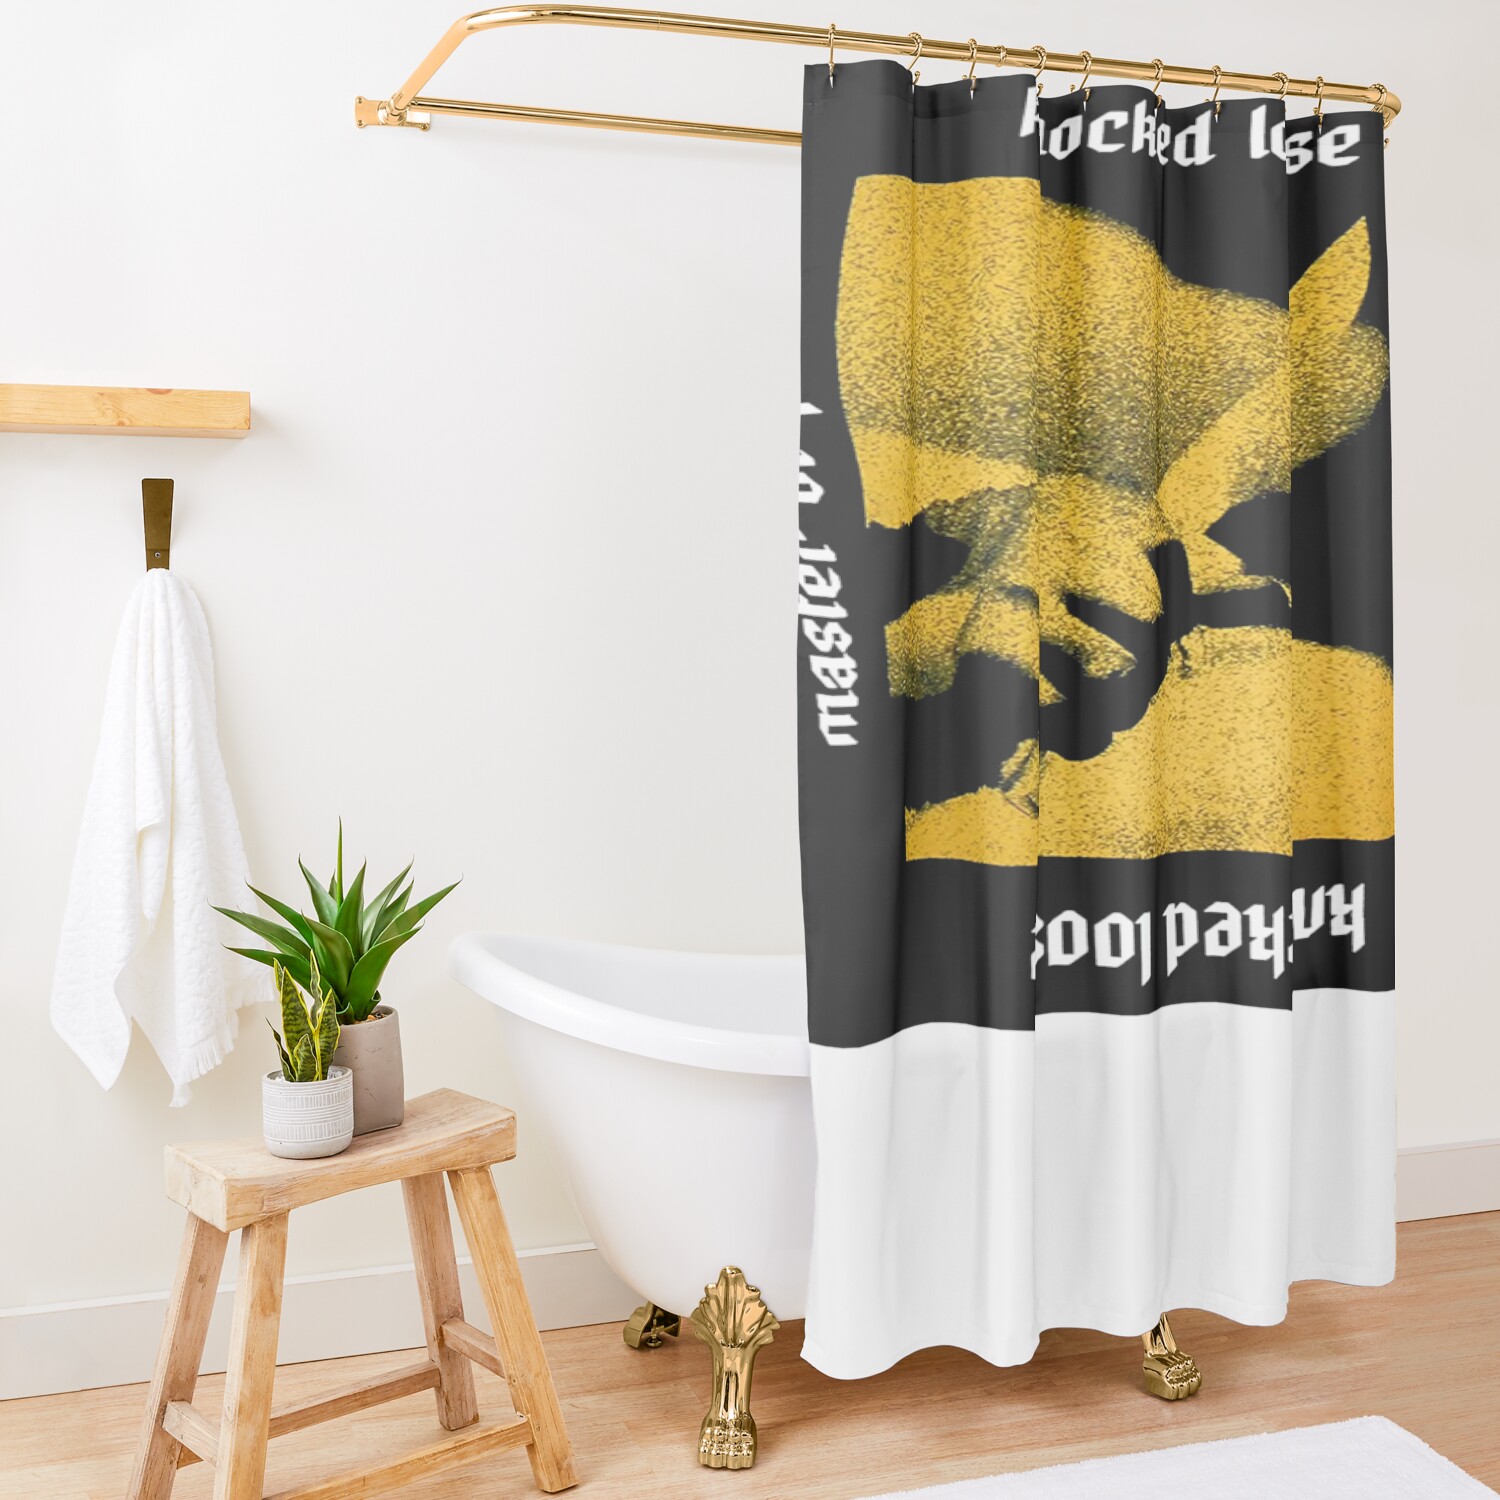 urshower curtain opensquare1500x1500 8 - Knocked Loose Shop